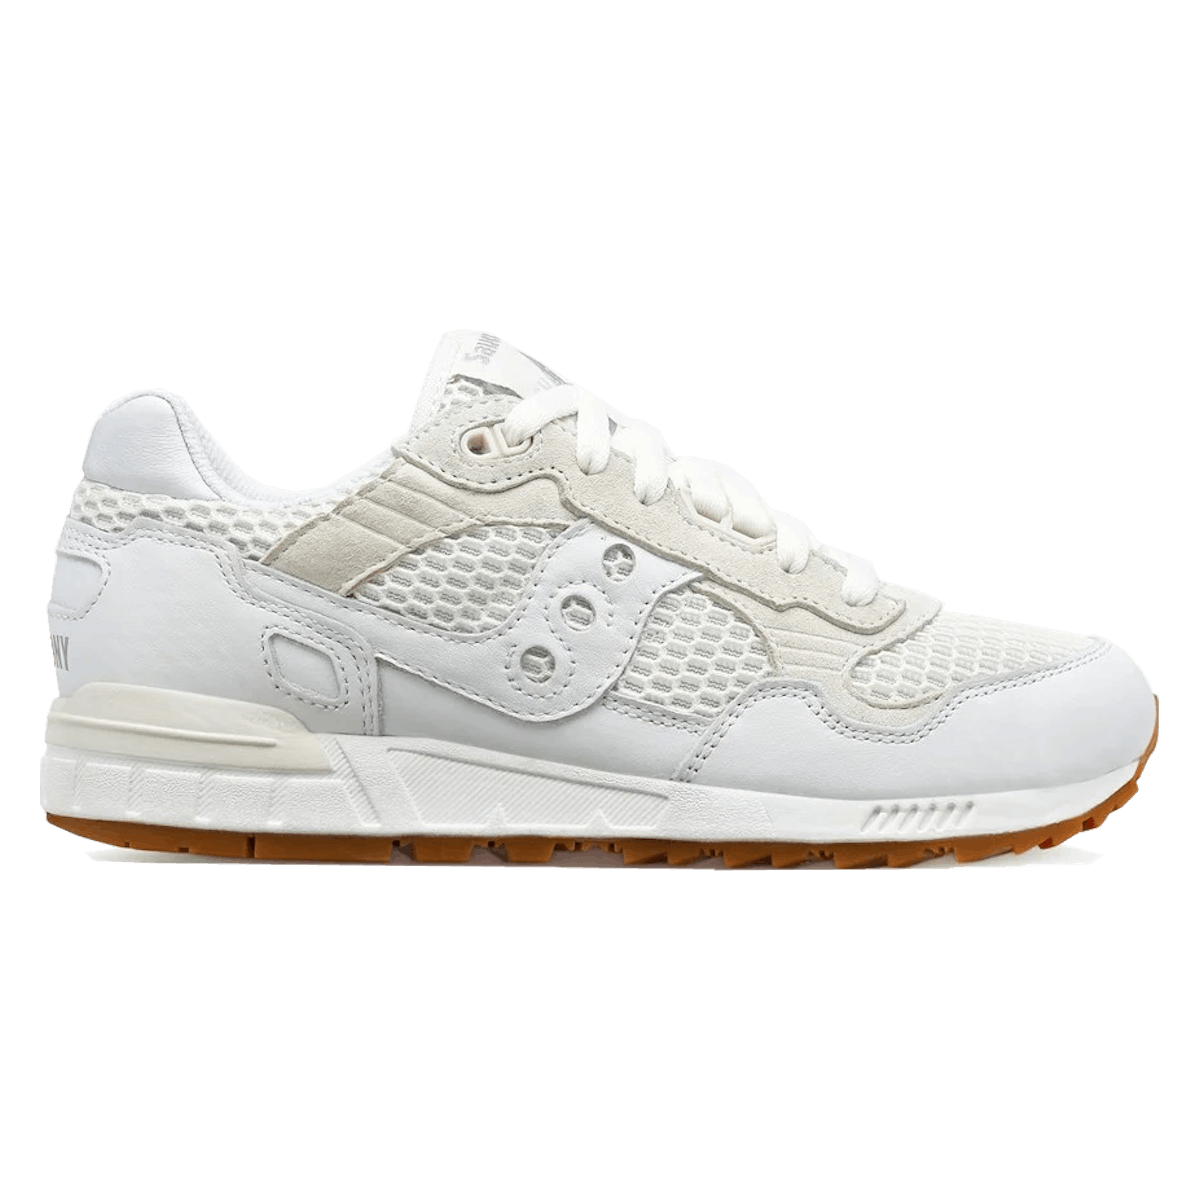 Saucony Shadow 5000 Wmns "White"